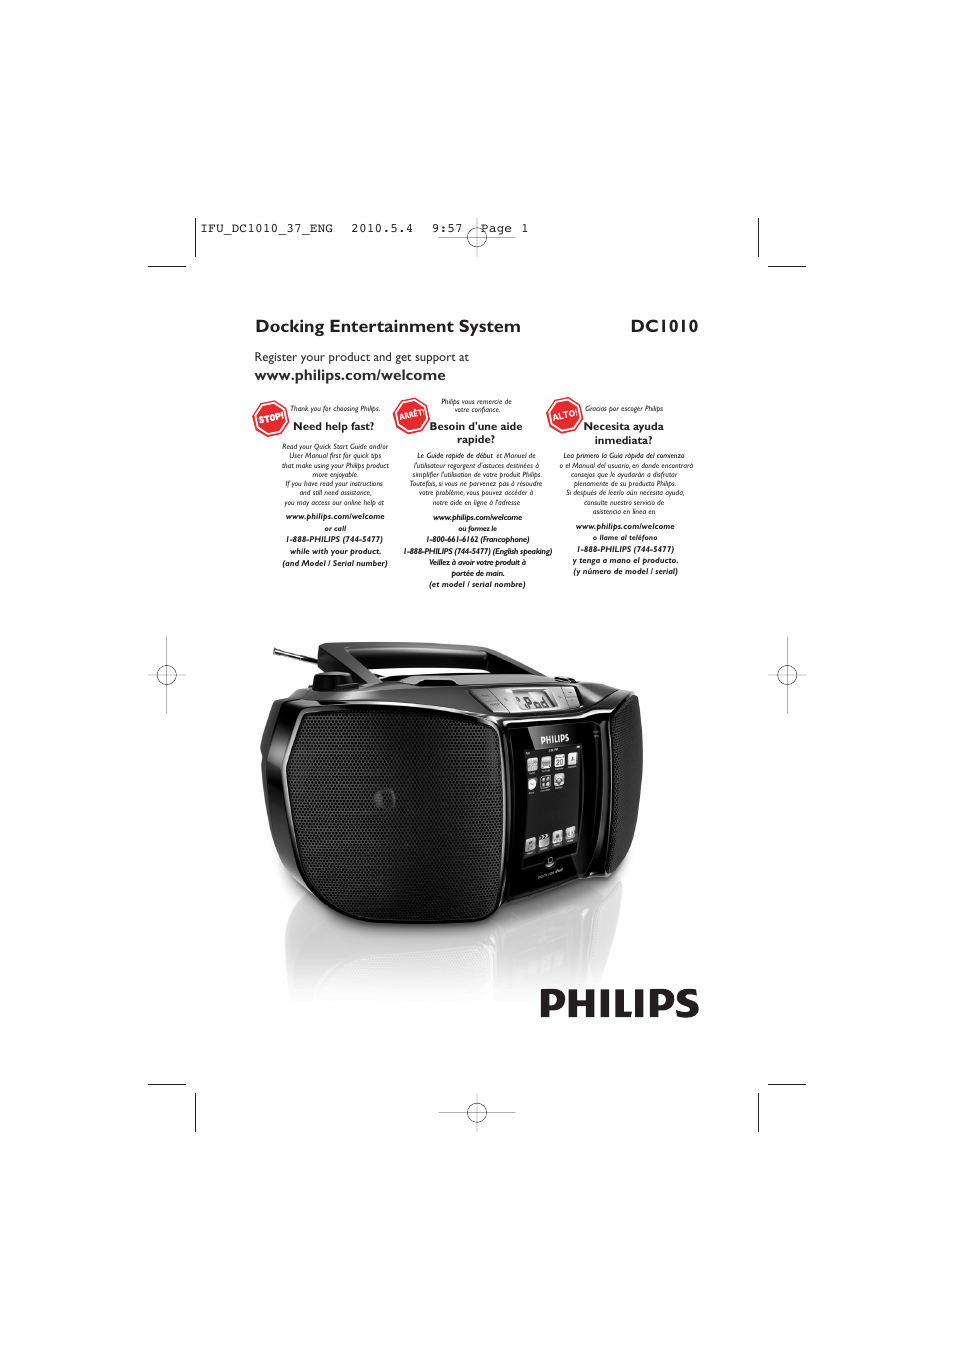 Philips DC1010 User Manual | 14 pages | Also for: DC1010-37B, Docking  Entertainment System DC1010 Plays CD and CD-R-RW AM-FM stereo tuner with  Dynamic Bass Boost